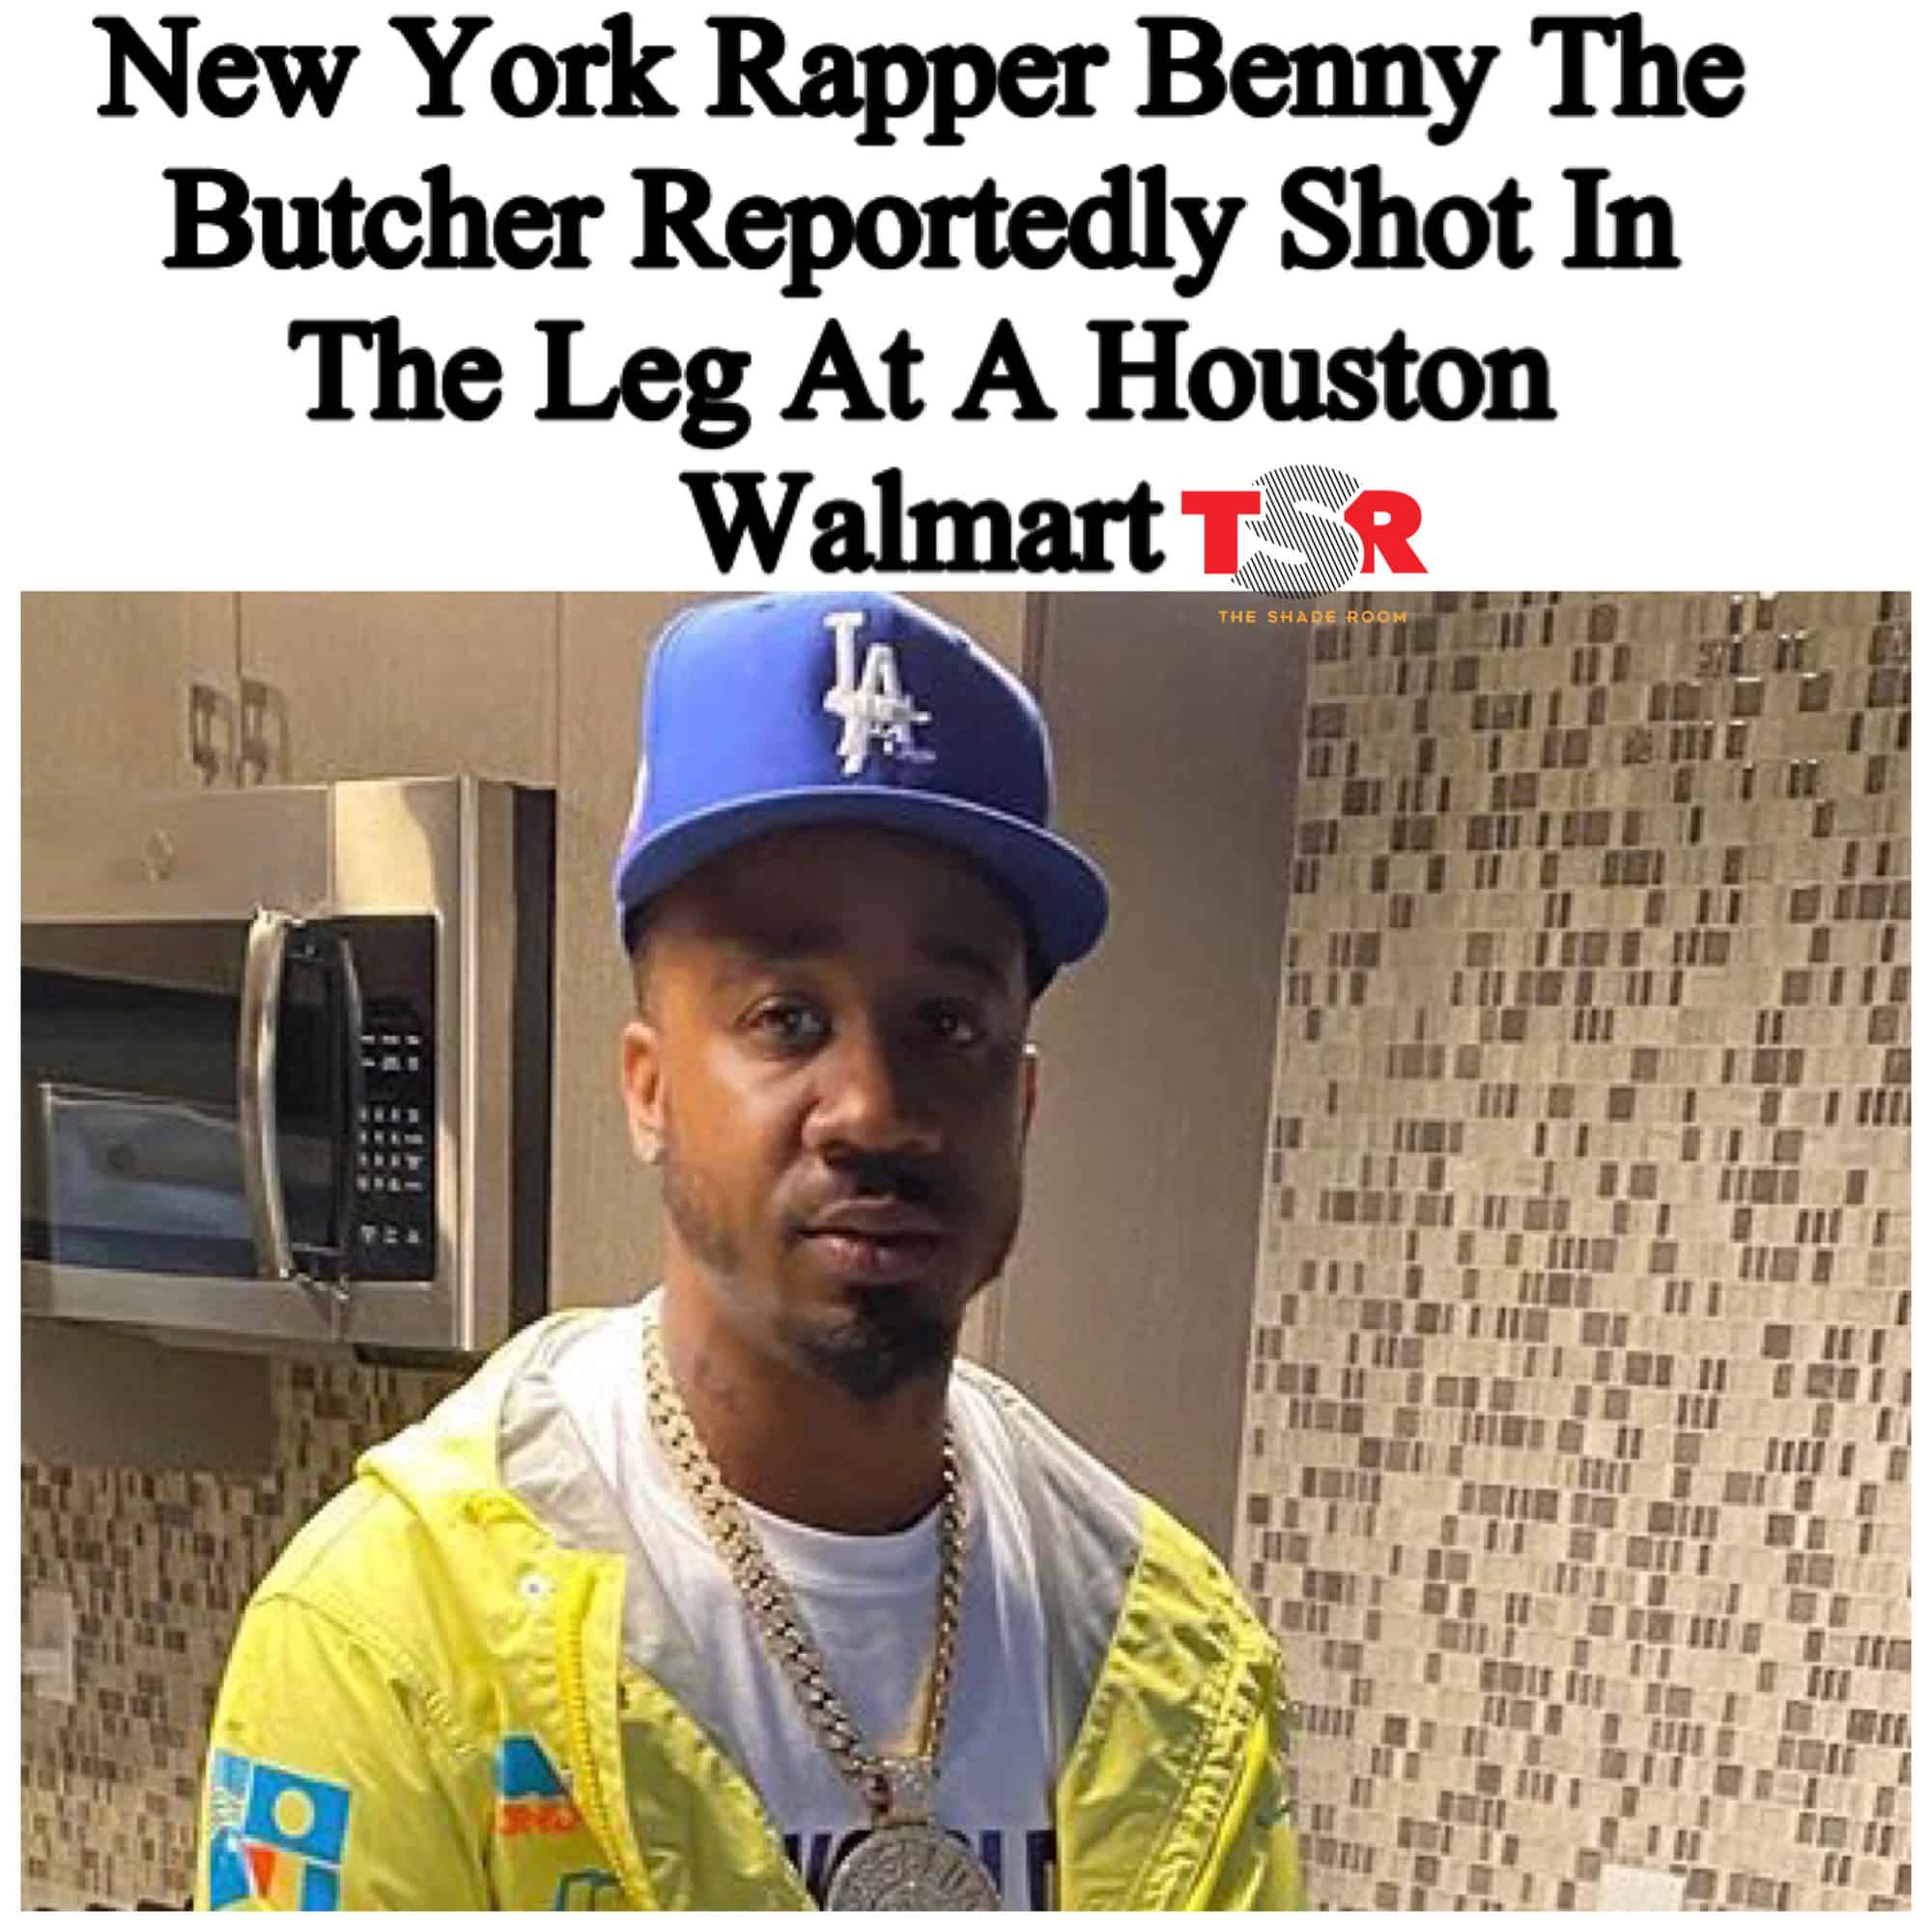 New York Rapper Benny The Butcher Reportedly Shot In The Leg At A Houston Walmart